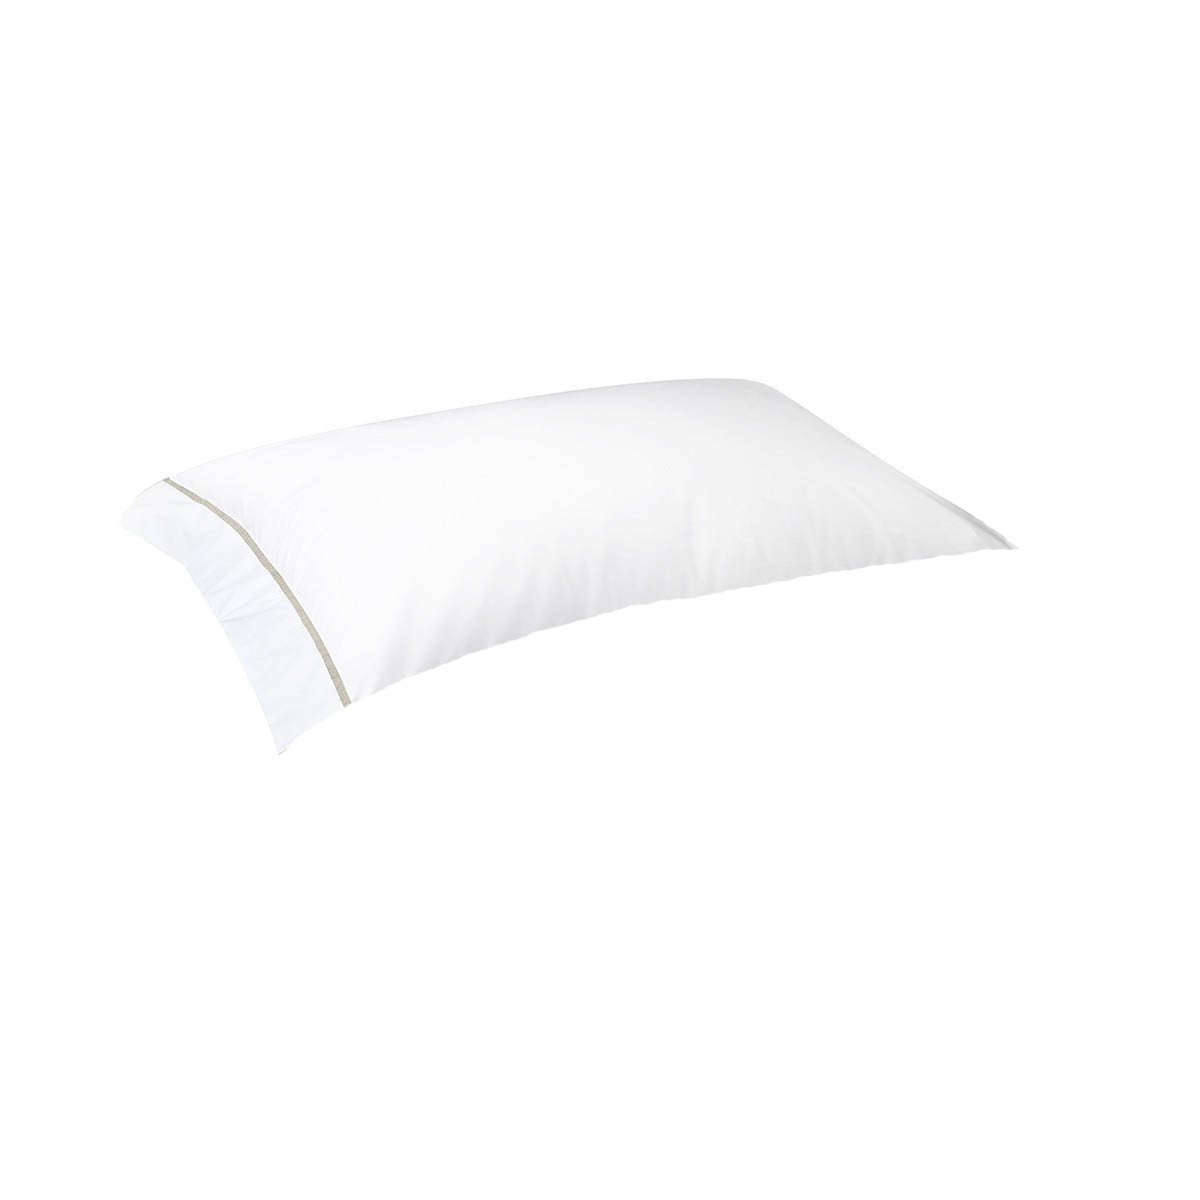 Athena Nacre Bedding Collection by Yves Delorme | Fig Linens - White and ivory pillowcase